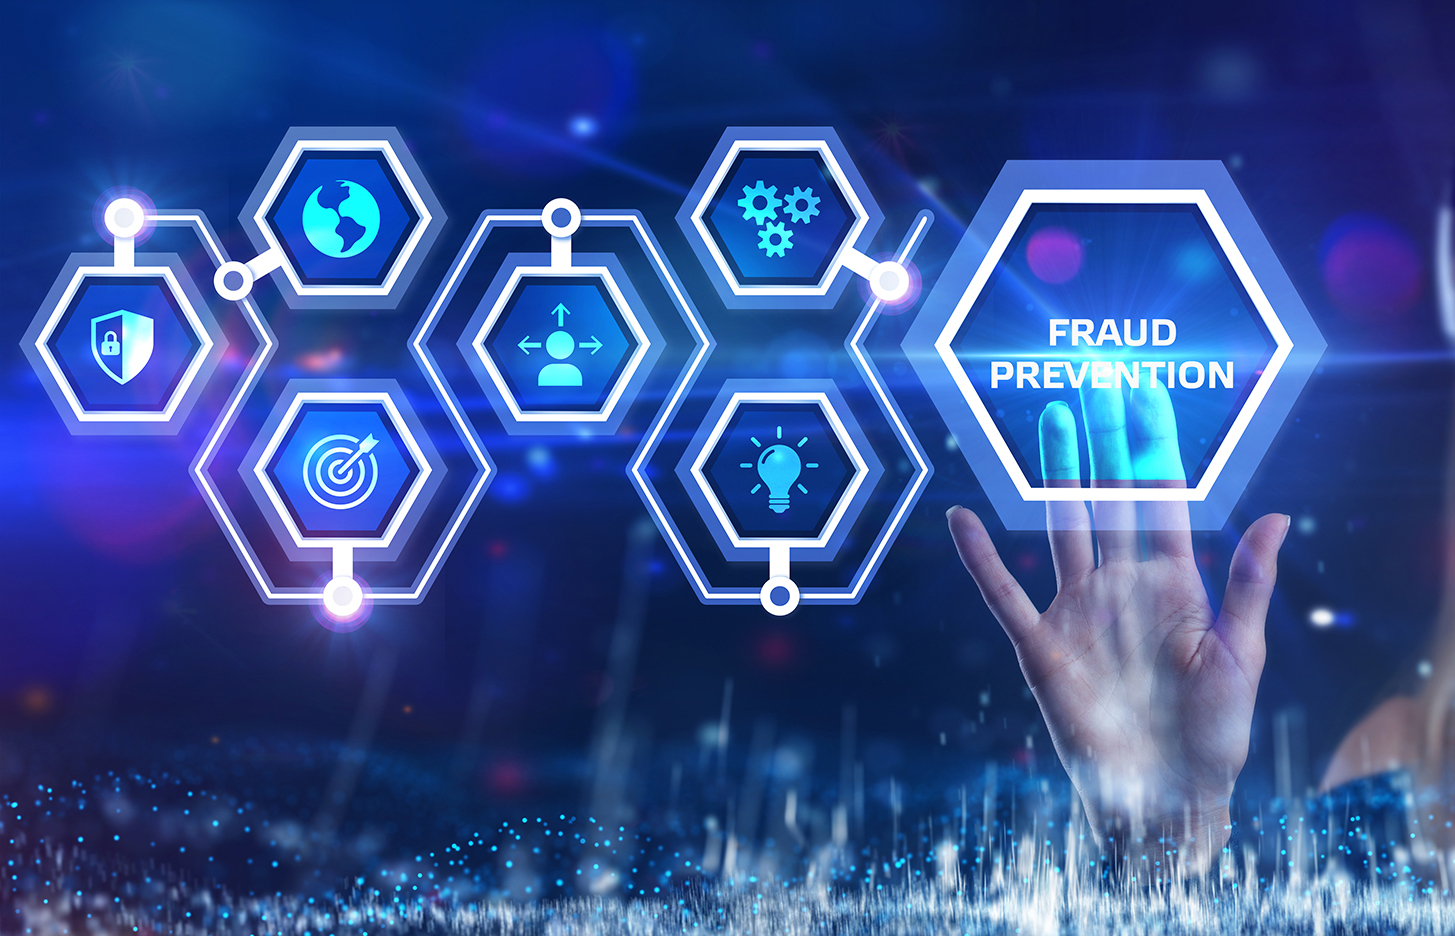 1 - Check Fraud Prevention - cropped